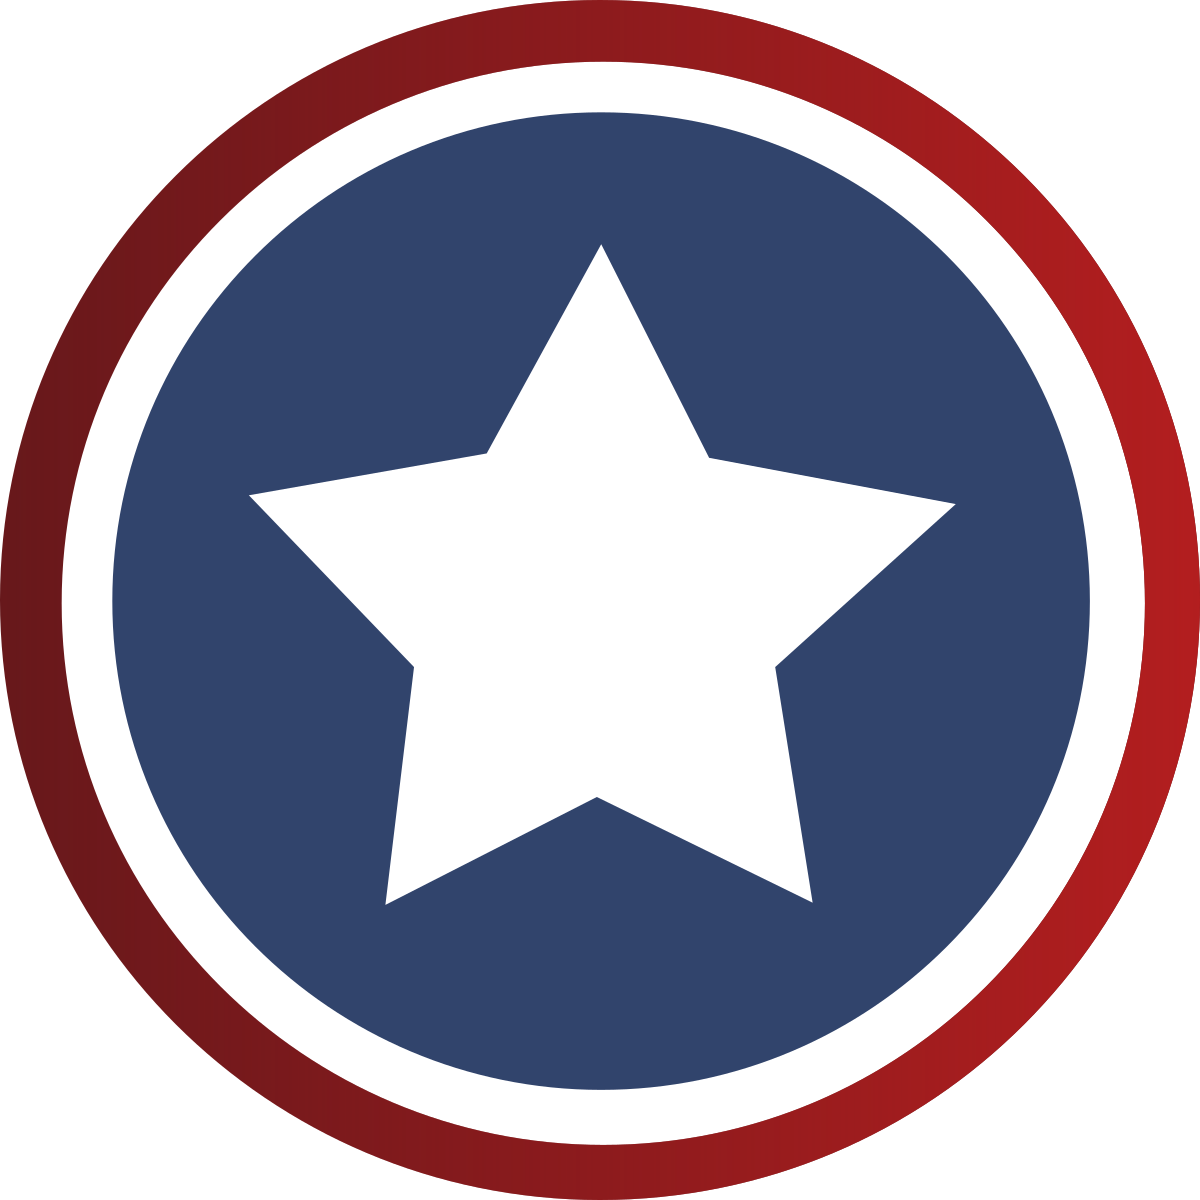 Captain America Shield Graphic PNG image